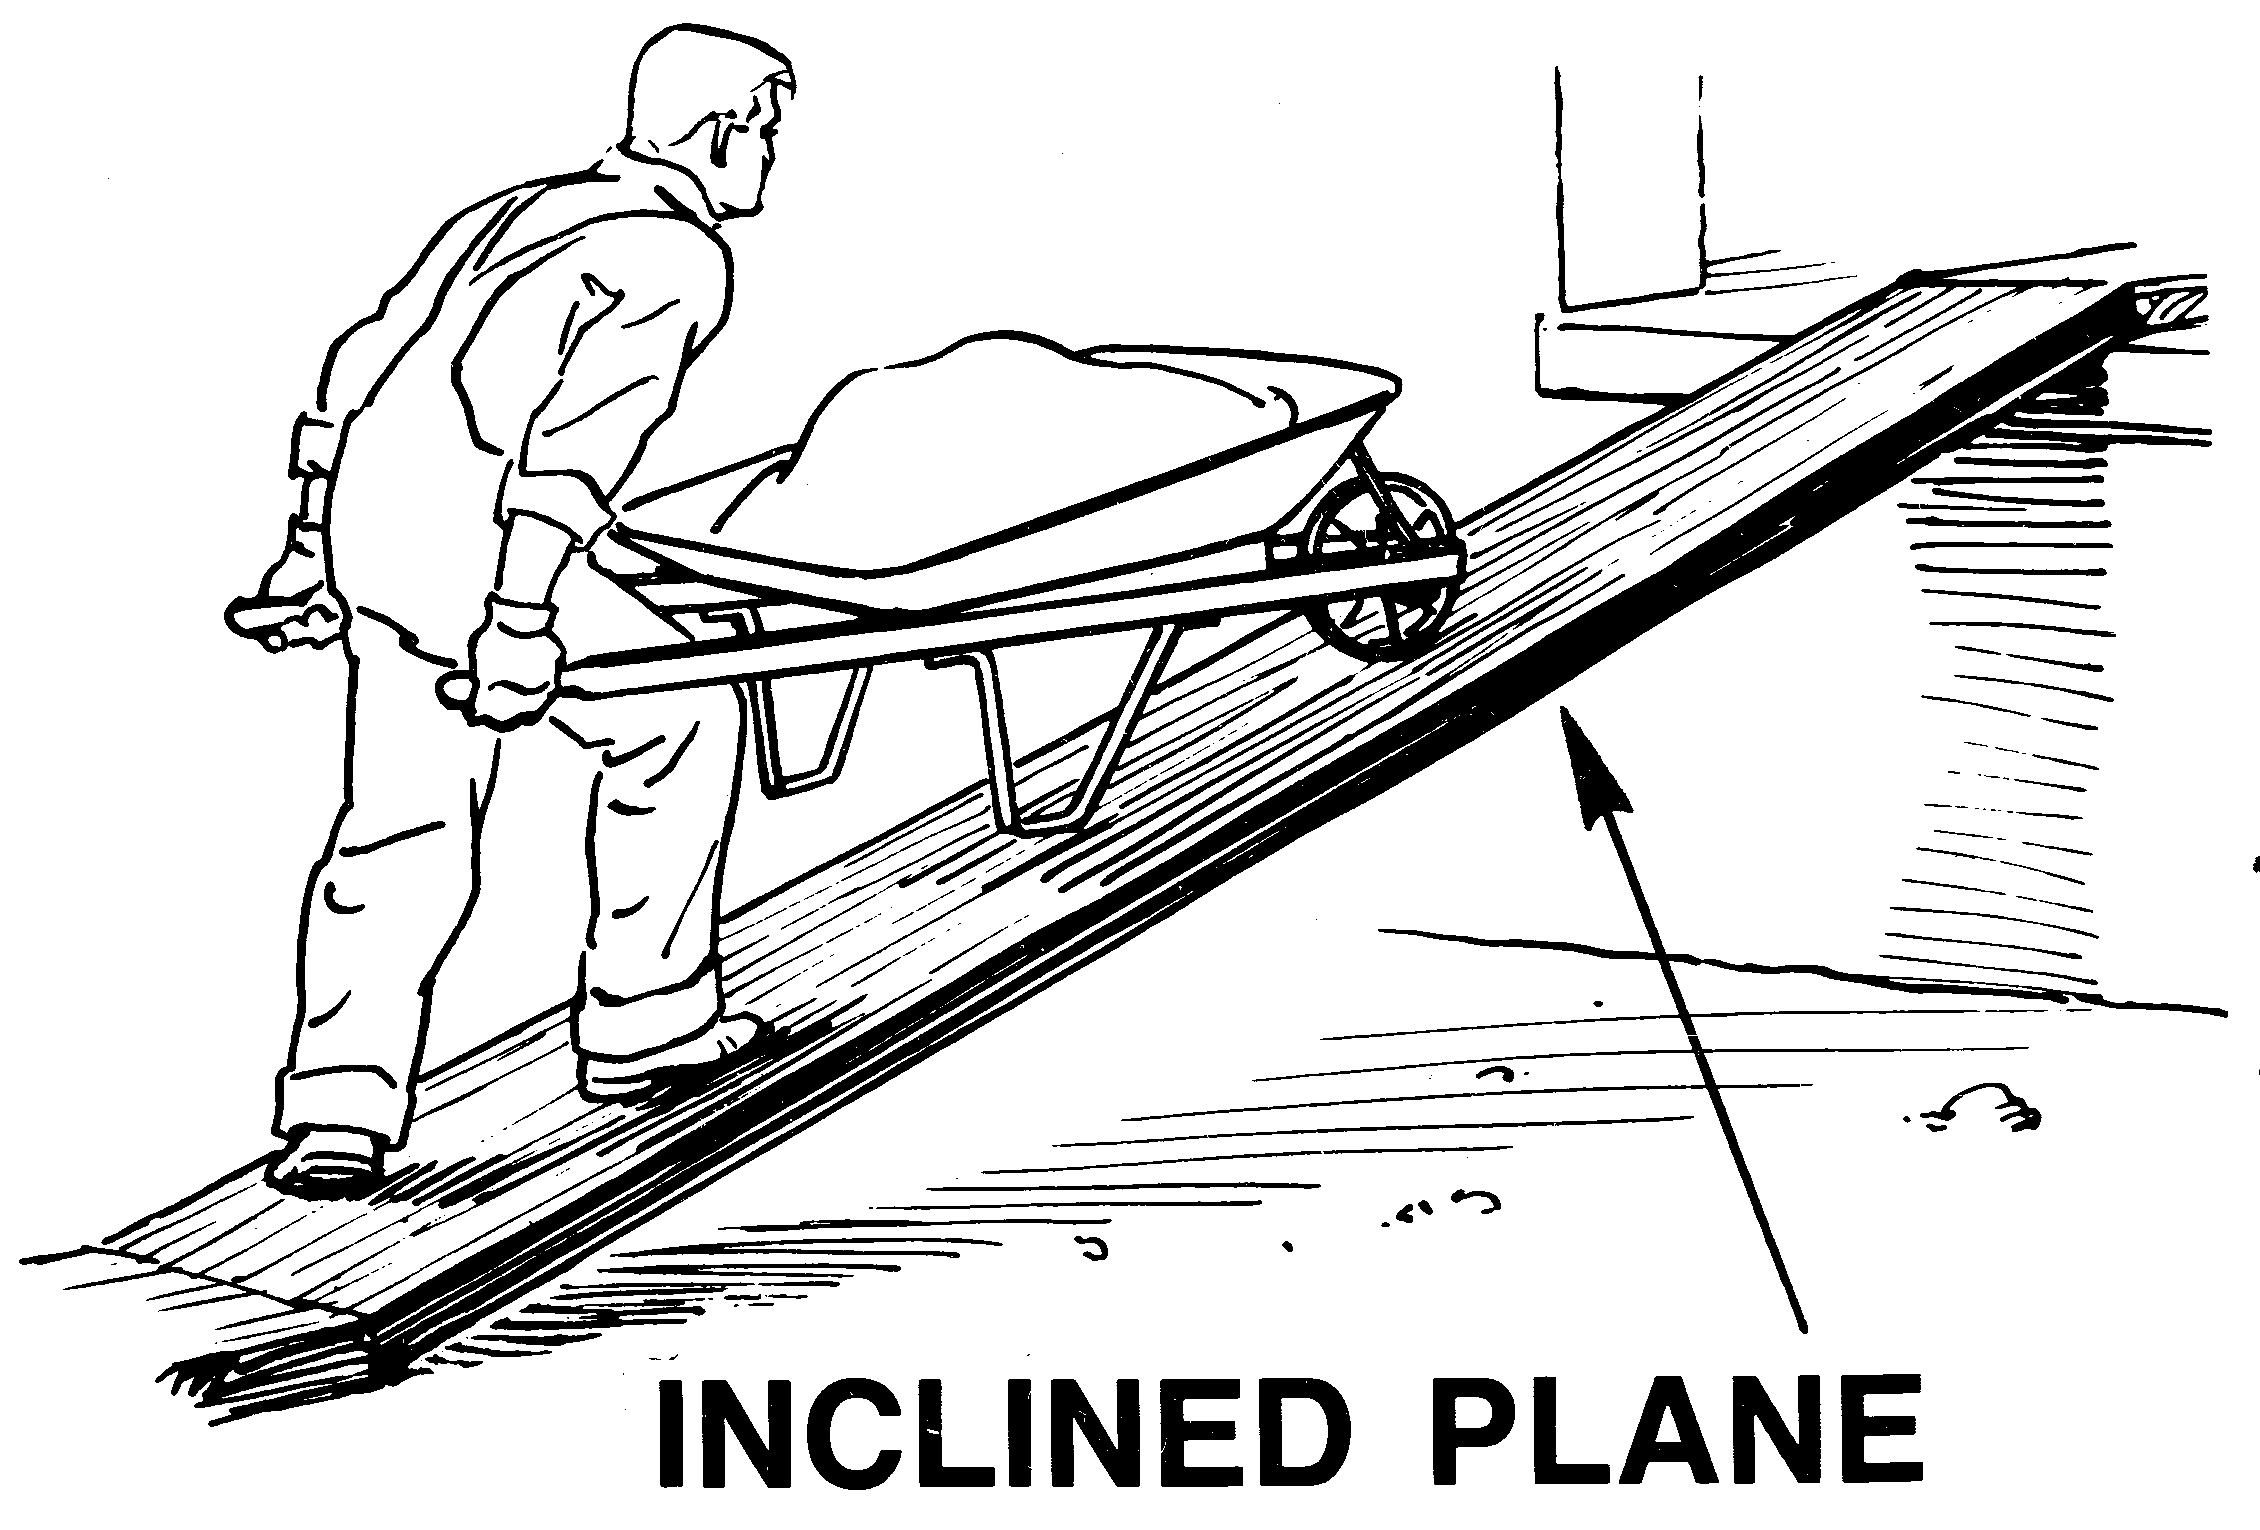 Inclined plane examples clipart.